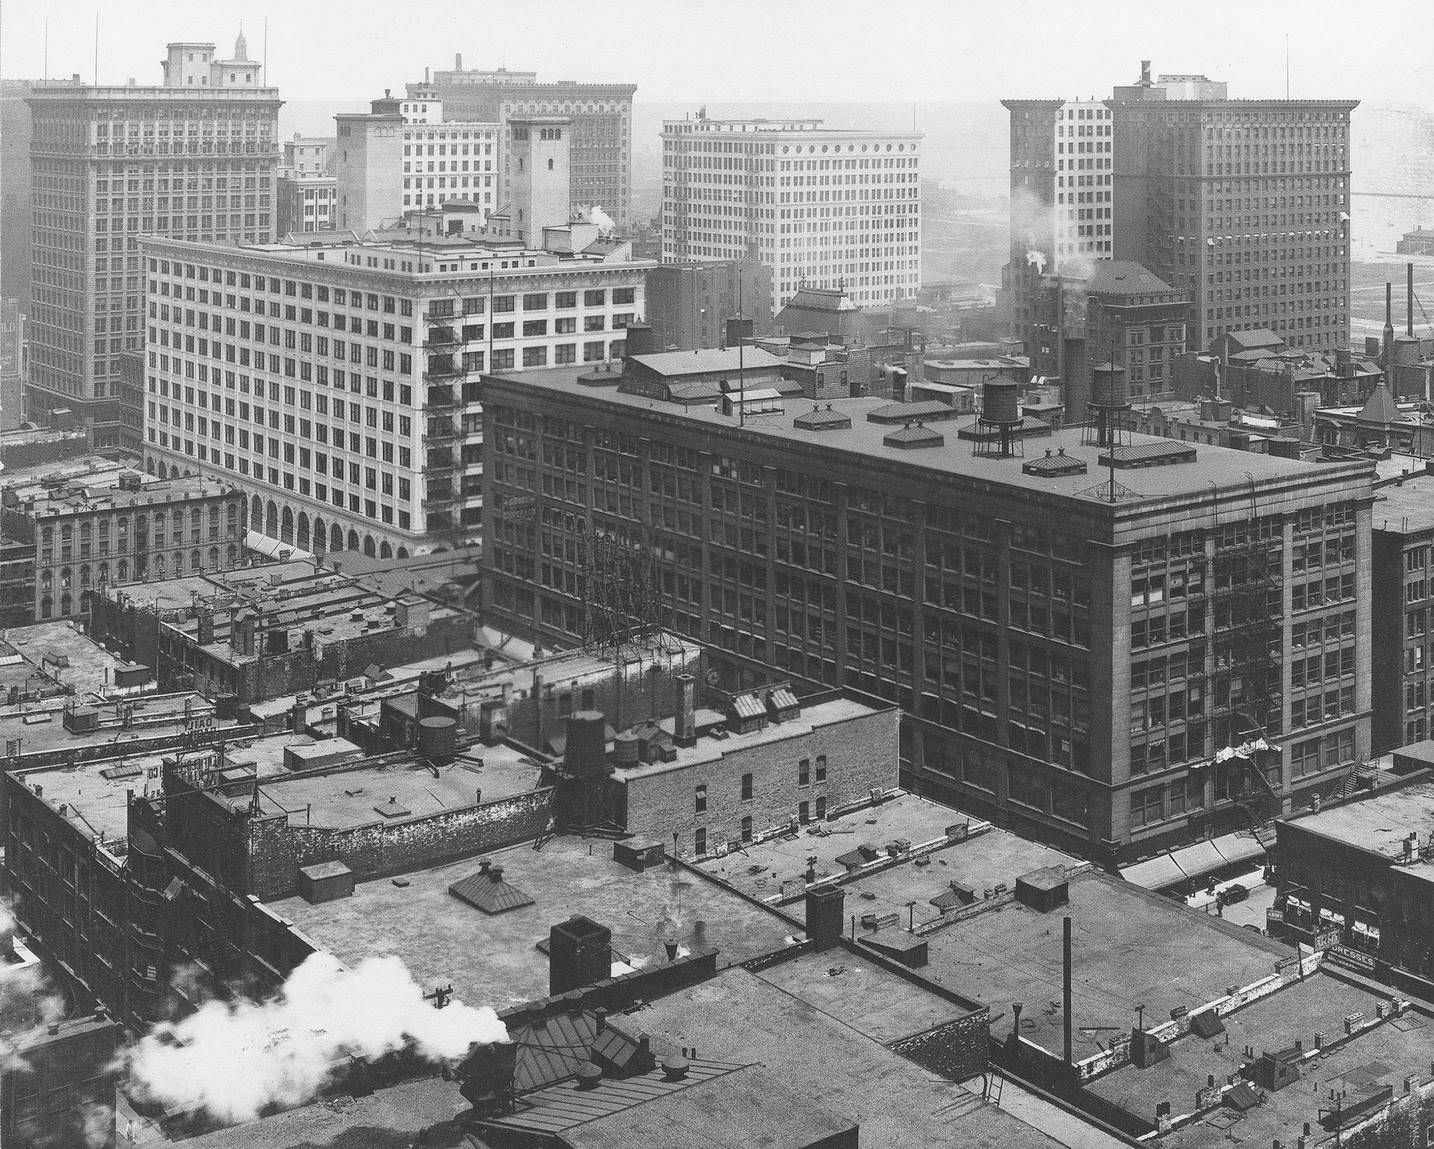 Panoramic view of Chicago Loop, Chicago, Illinois, 1913.